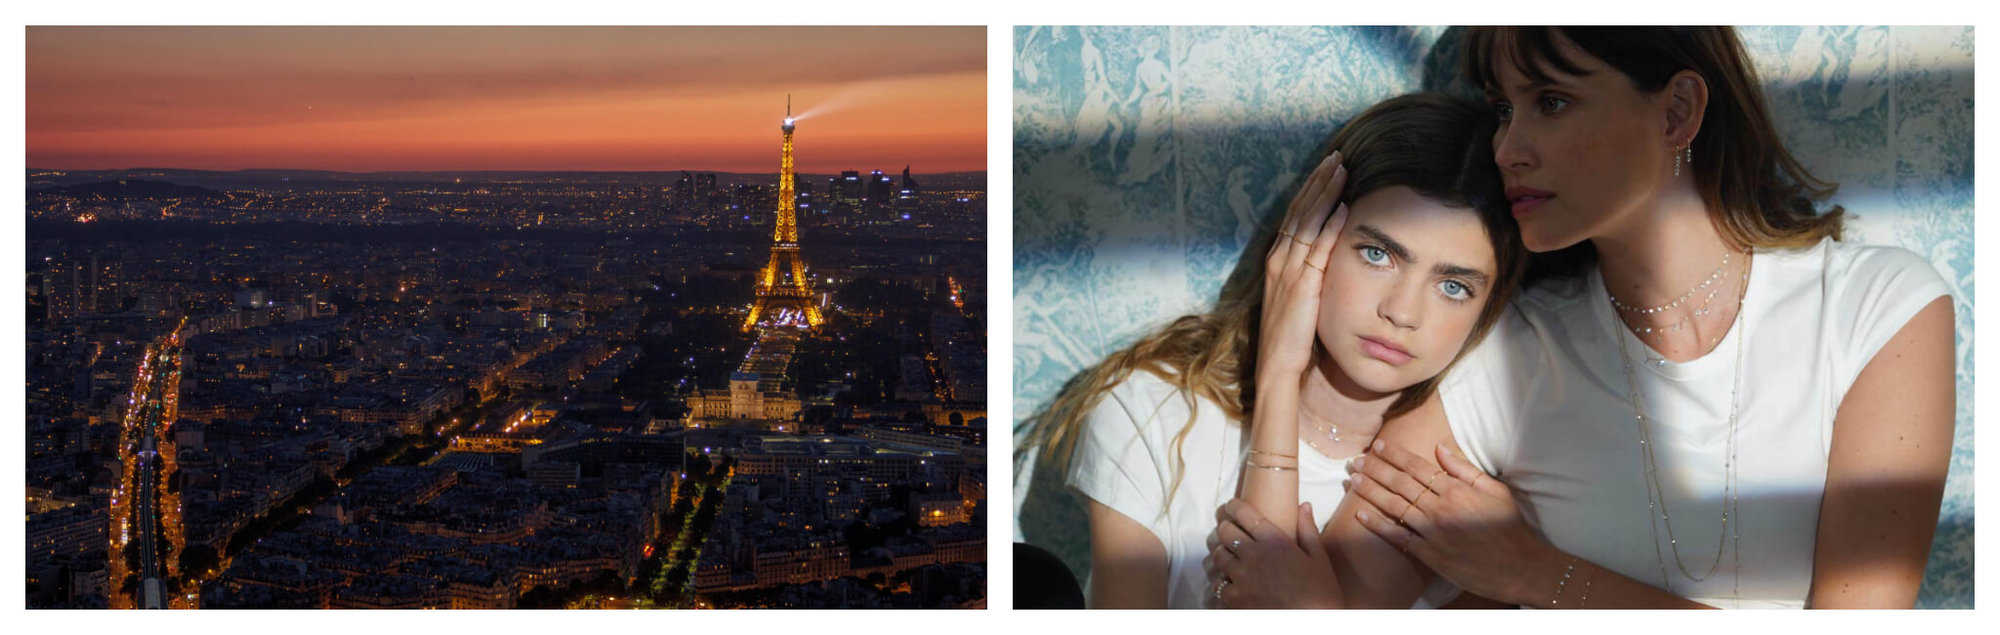 Right: The Eiffel Tower is lit up in the midst of the Parisian cityscape. Right: A mother and daughter wearing diamond necklaces and white t-shirts.